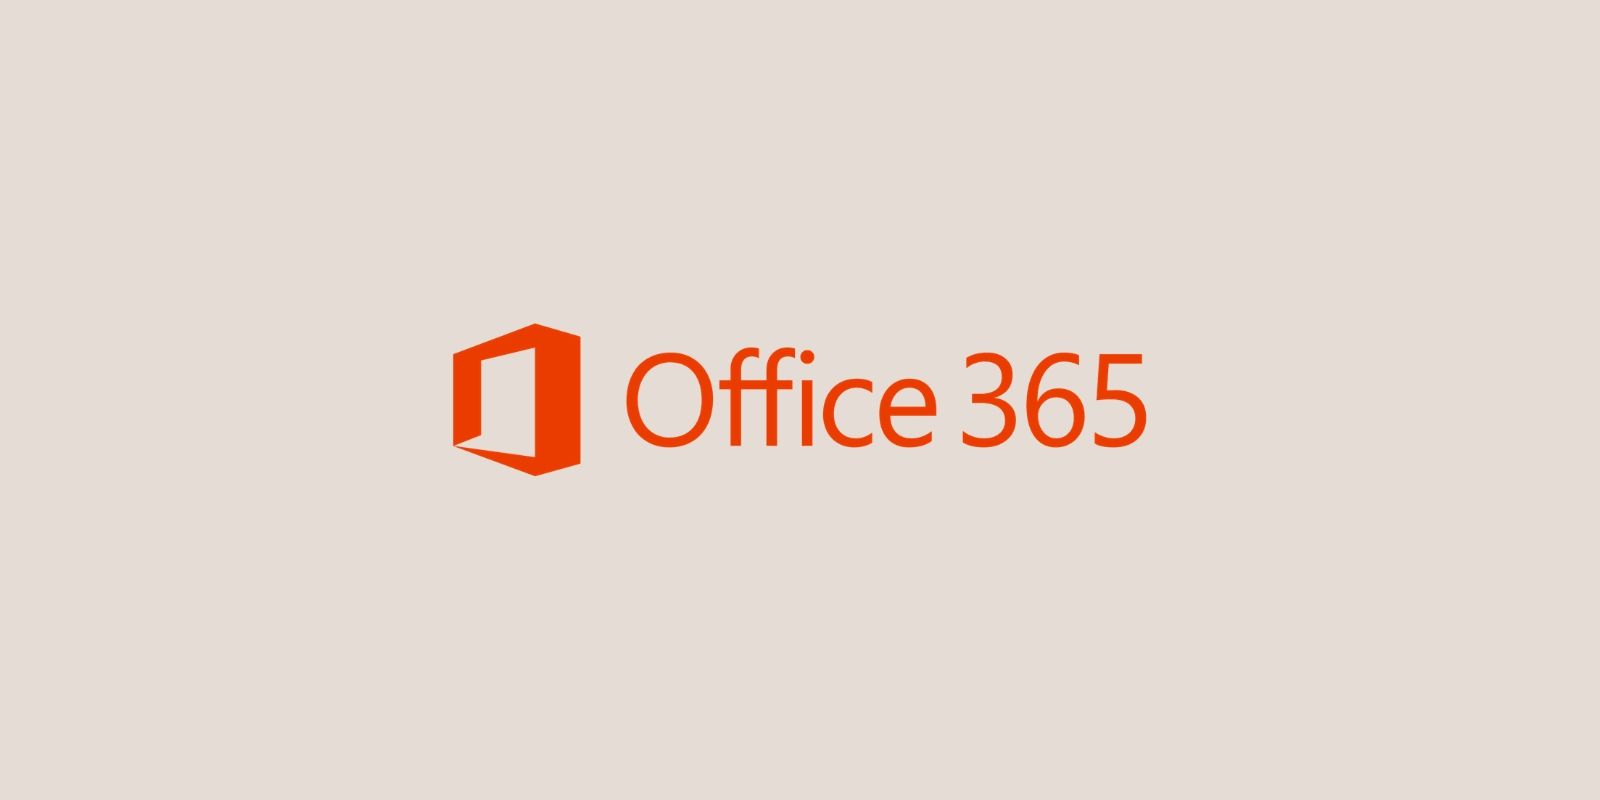 Does Microsoft Office 365 come with support?